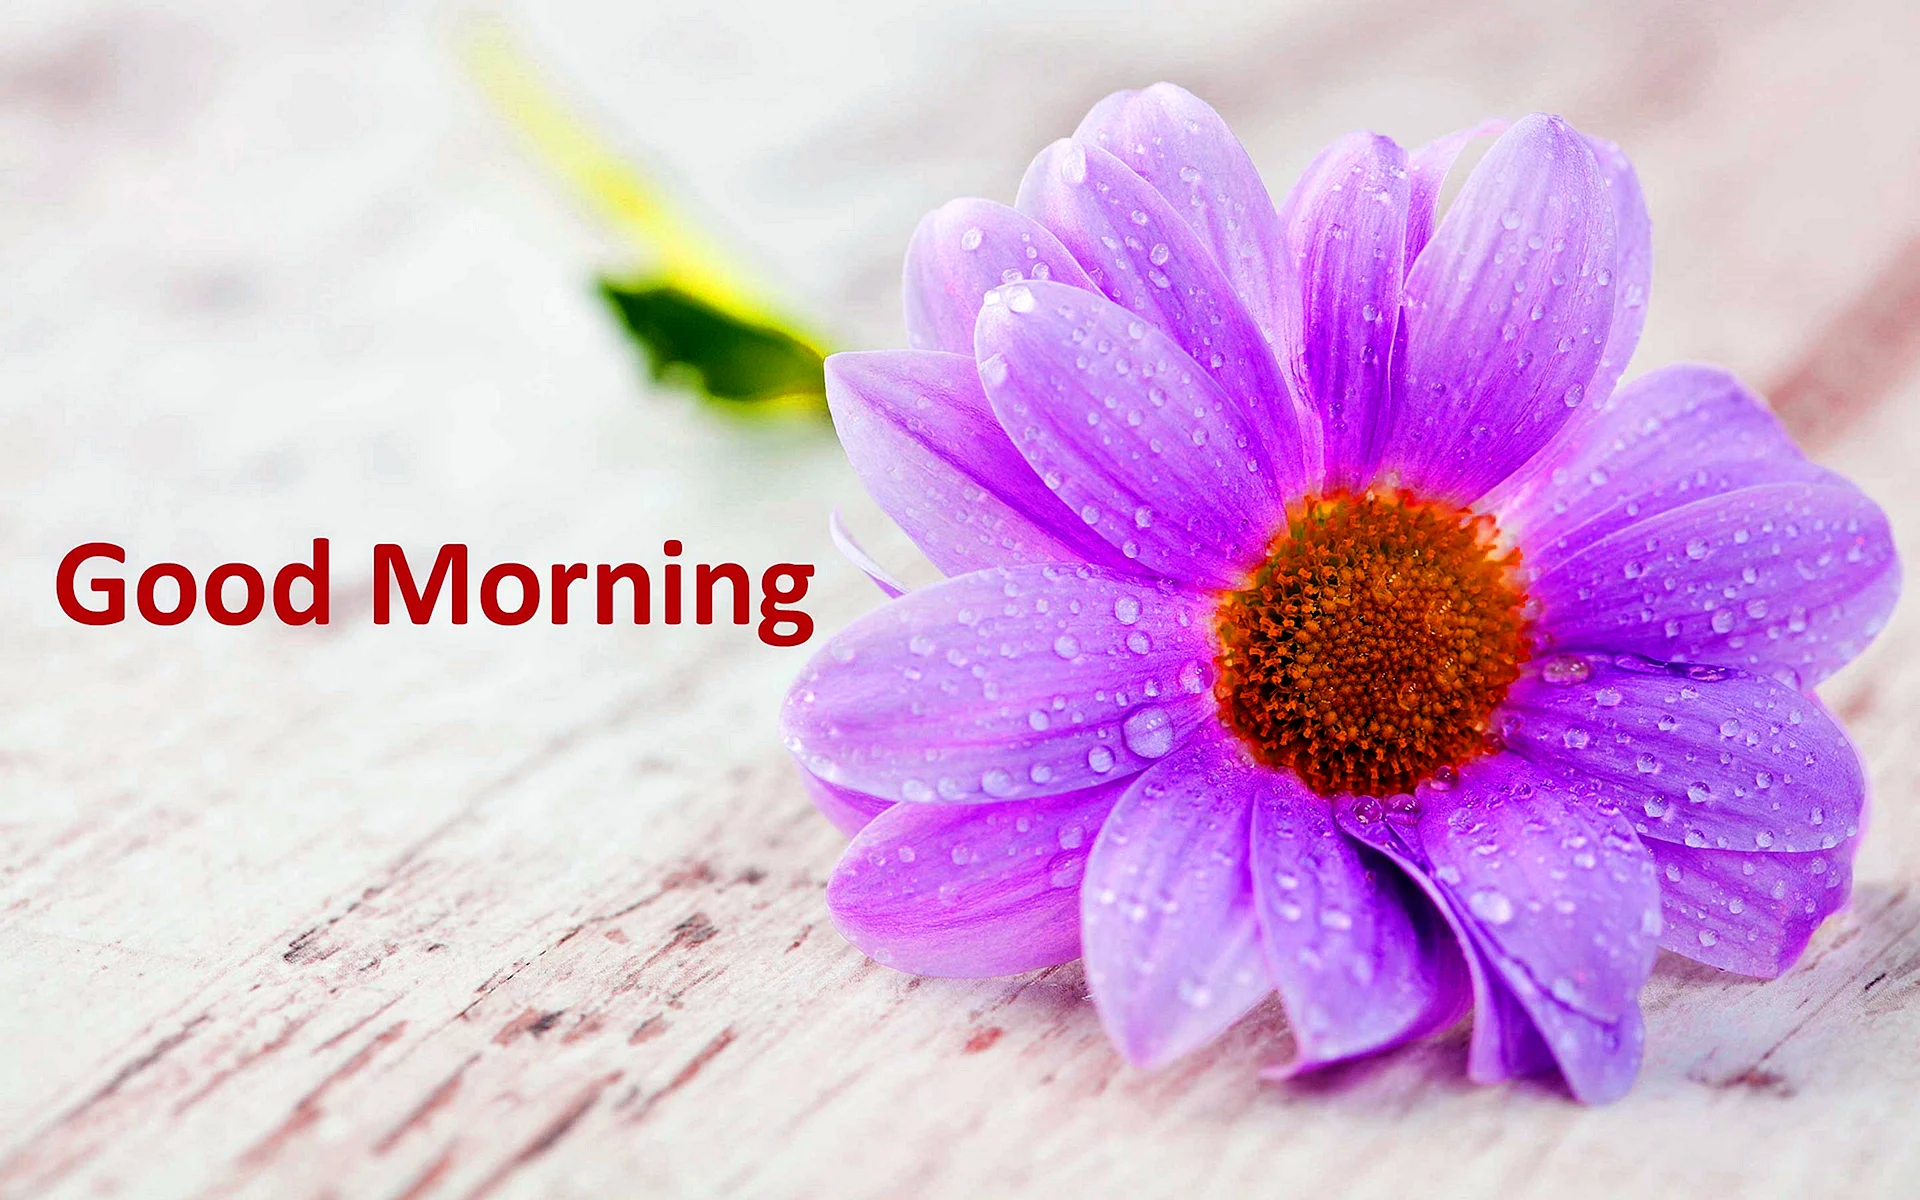 Good Morning Wishes With Beautiful Flowers Wallpapers - Free Good ...